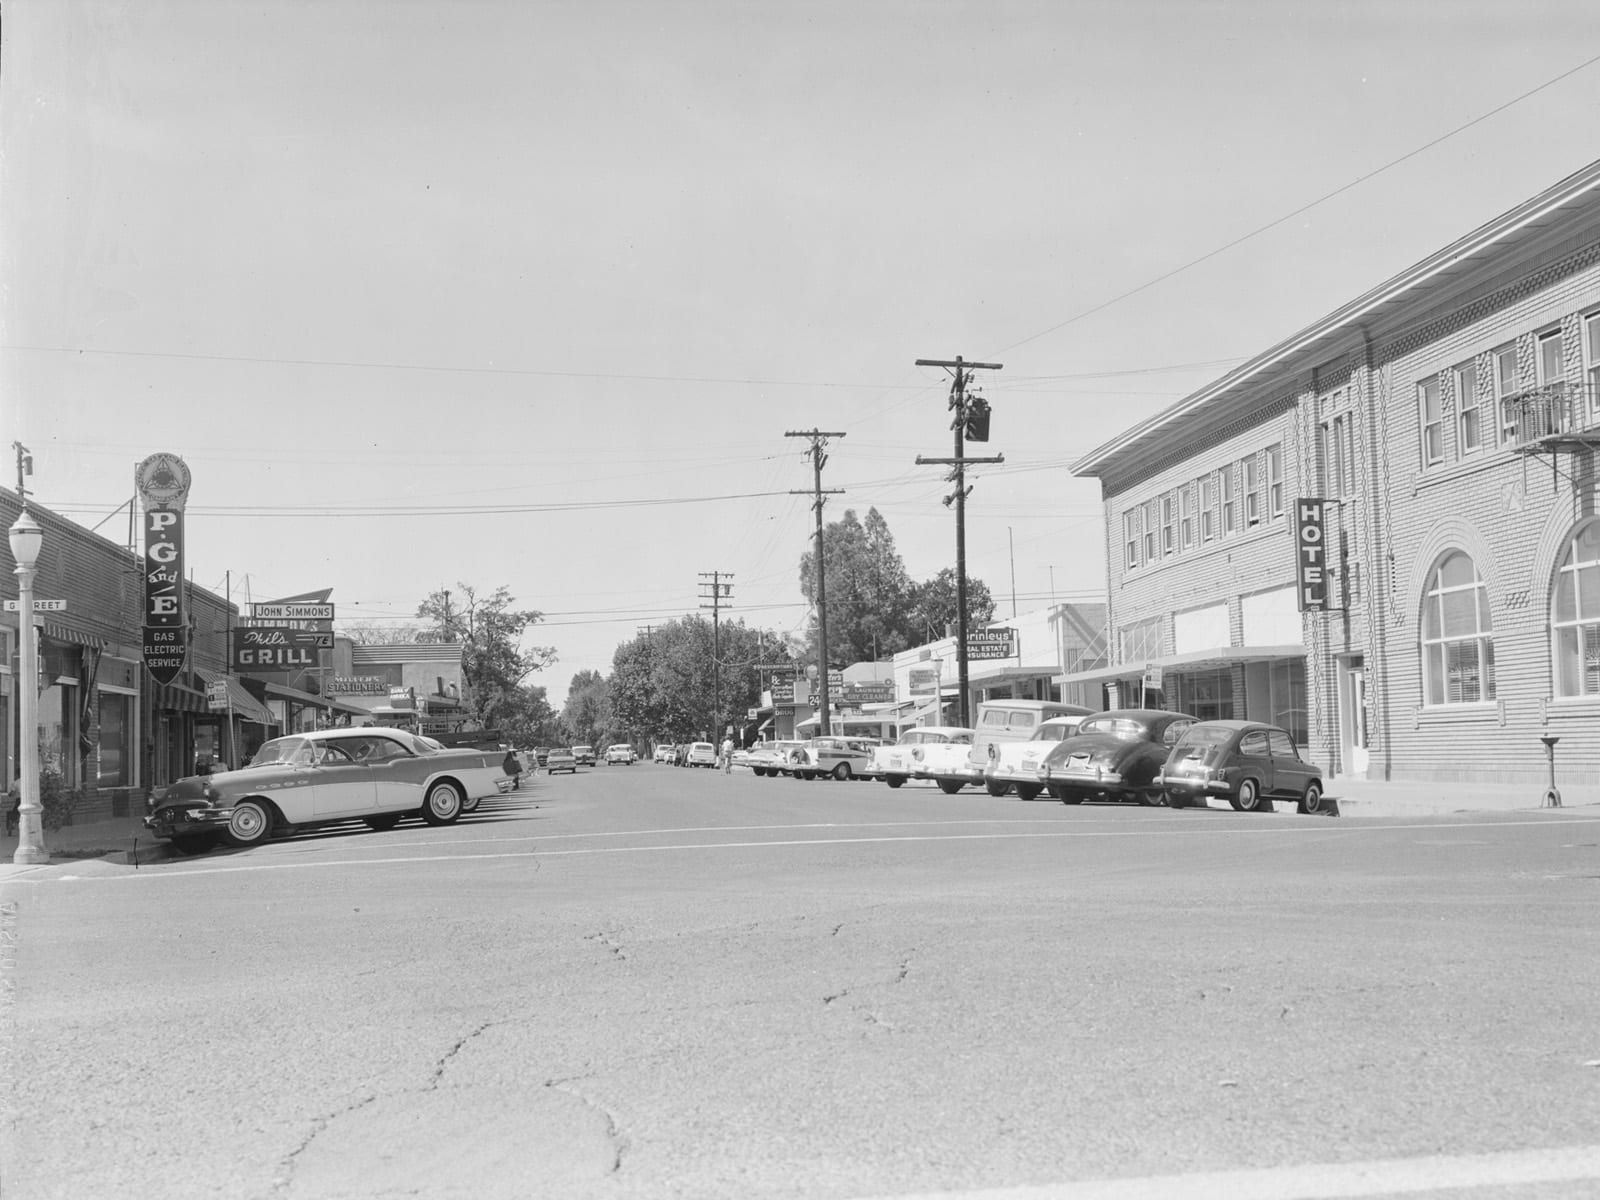 Second Street at G street, looking west, 1960